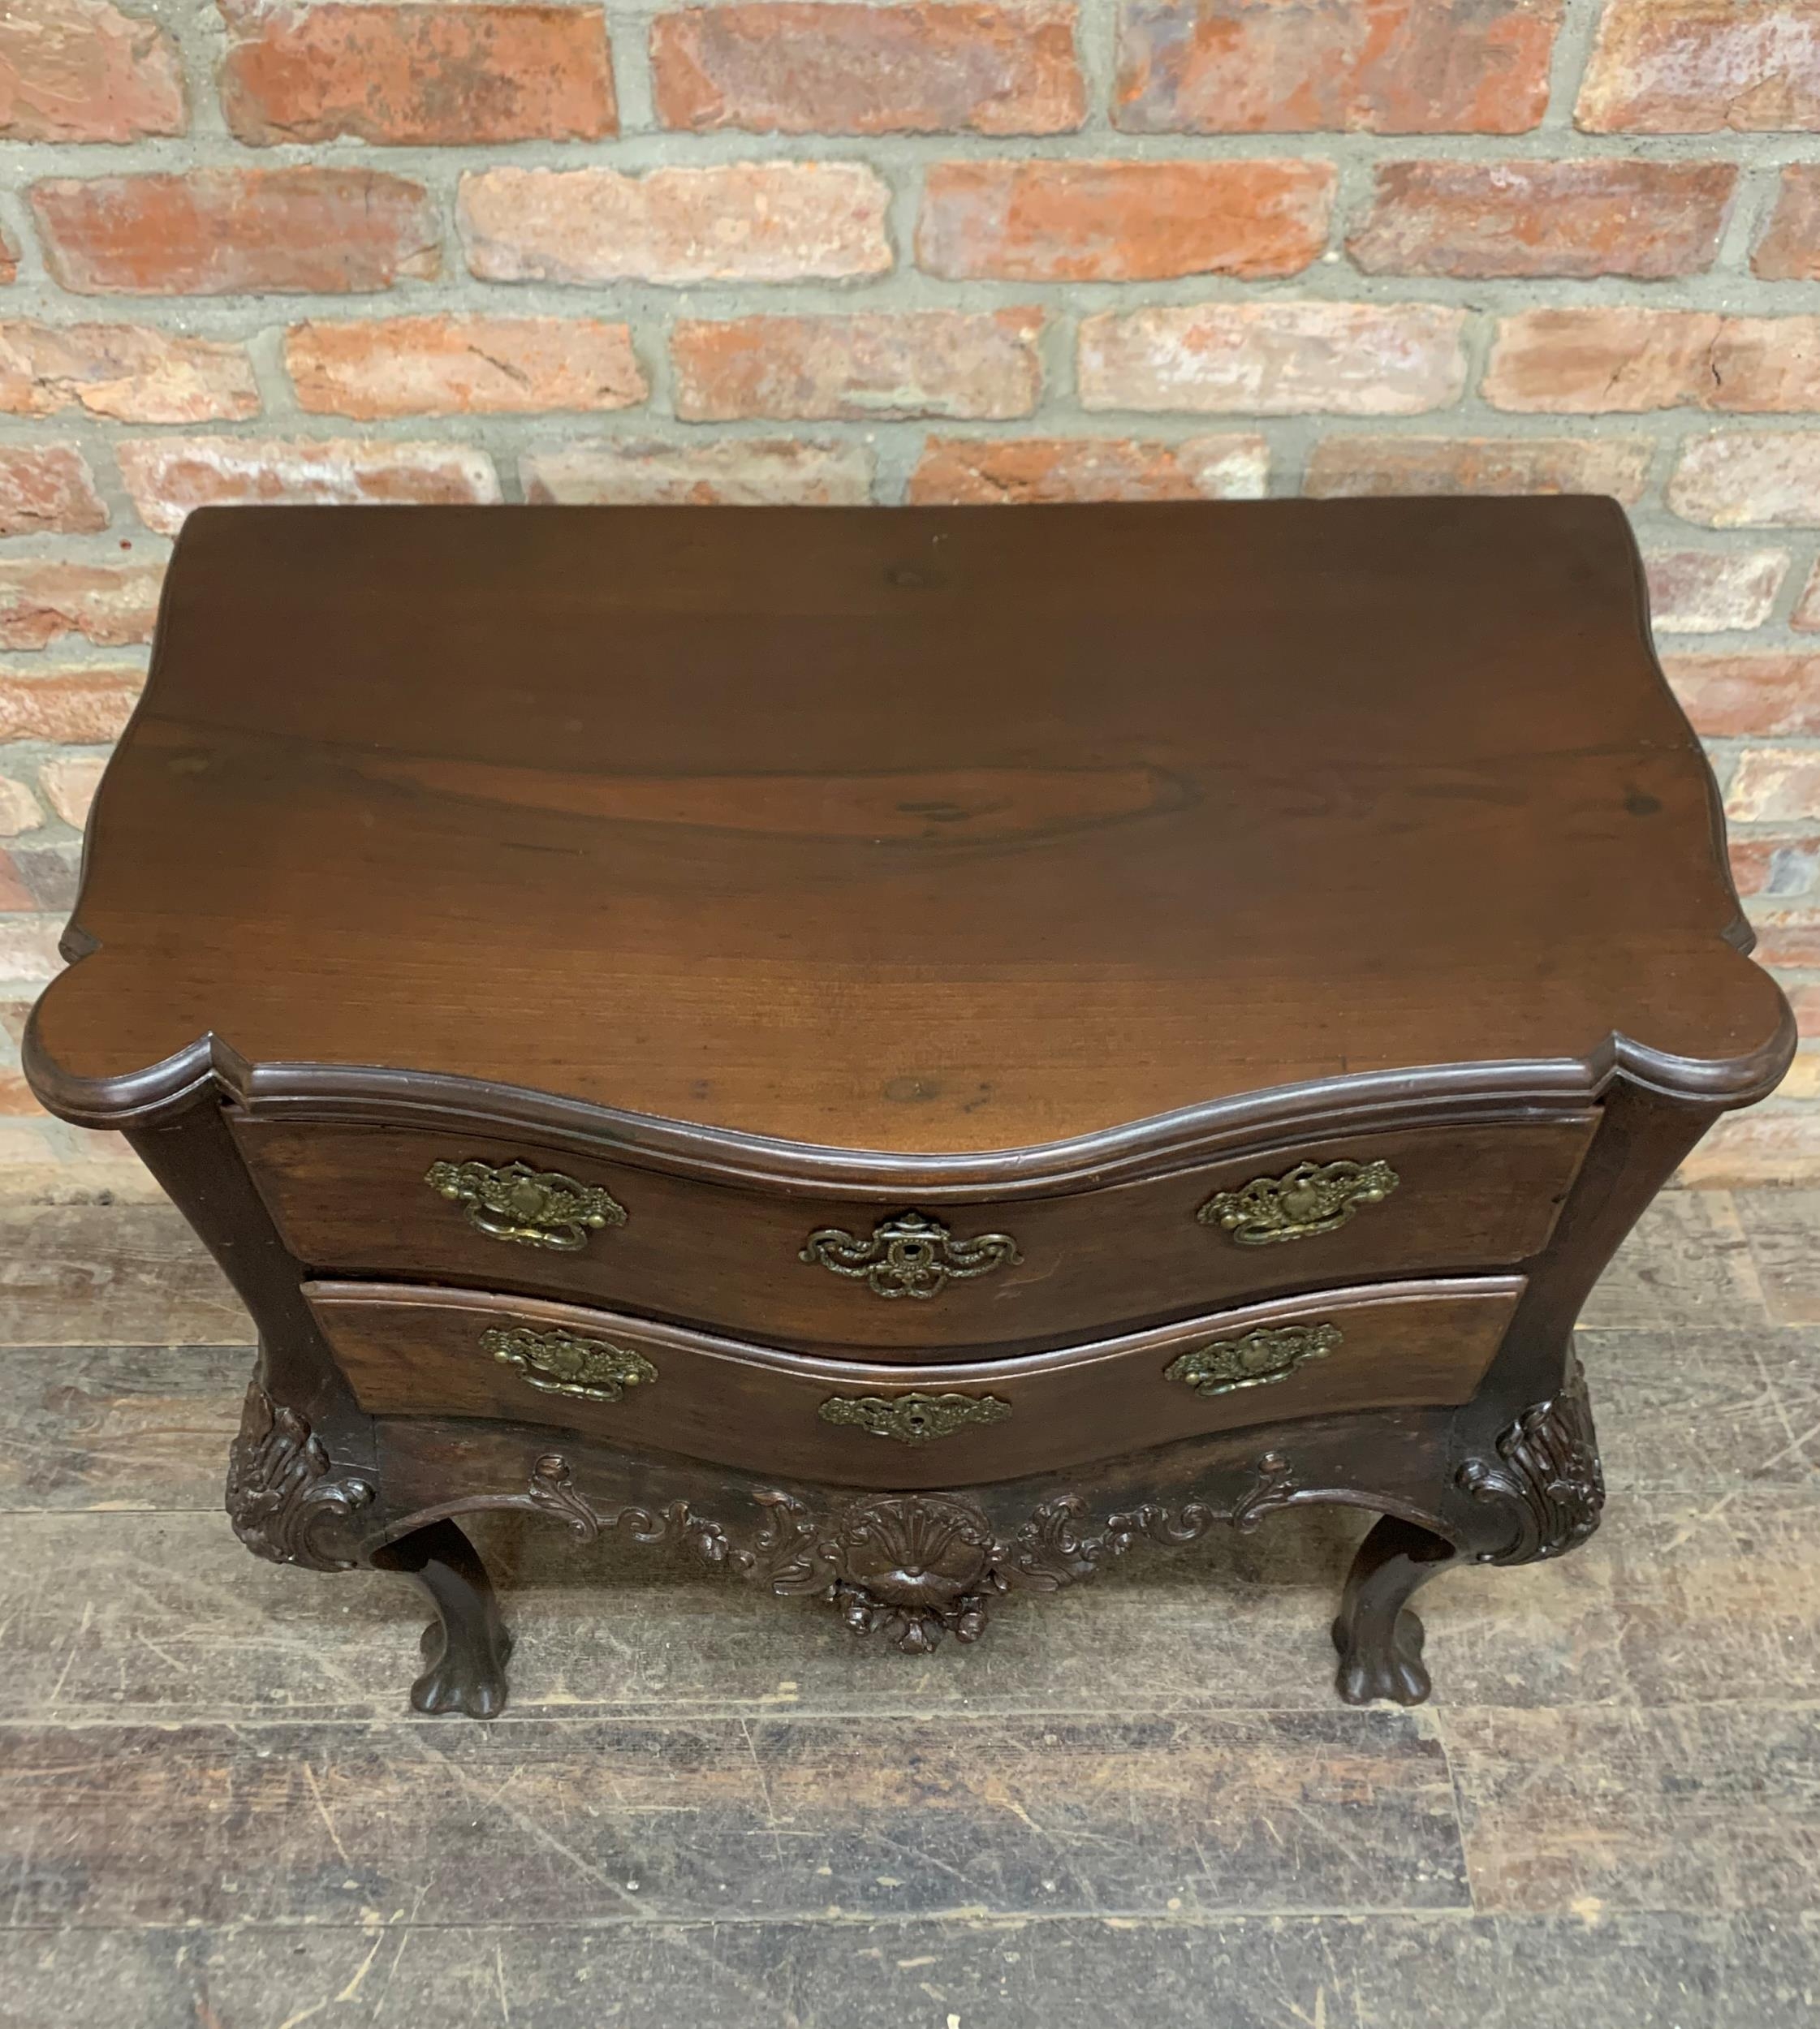 Good antique Spanish oak serpentine chest of drawers, with carved apron and cabriole legs, 83 x 83cm - Image 2 of 4